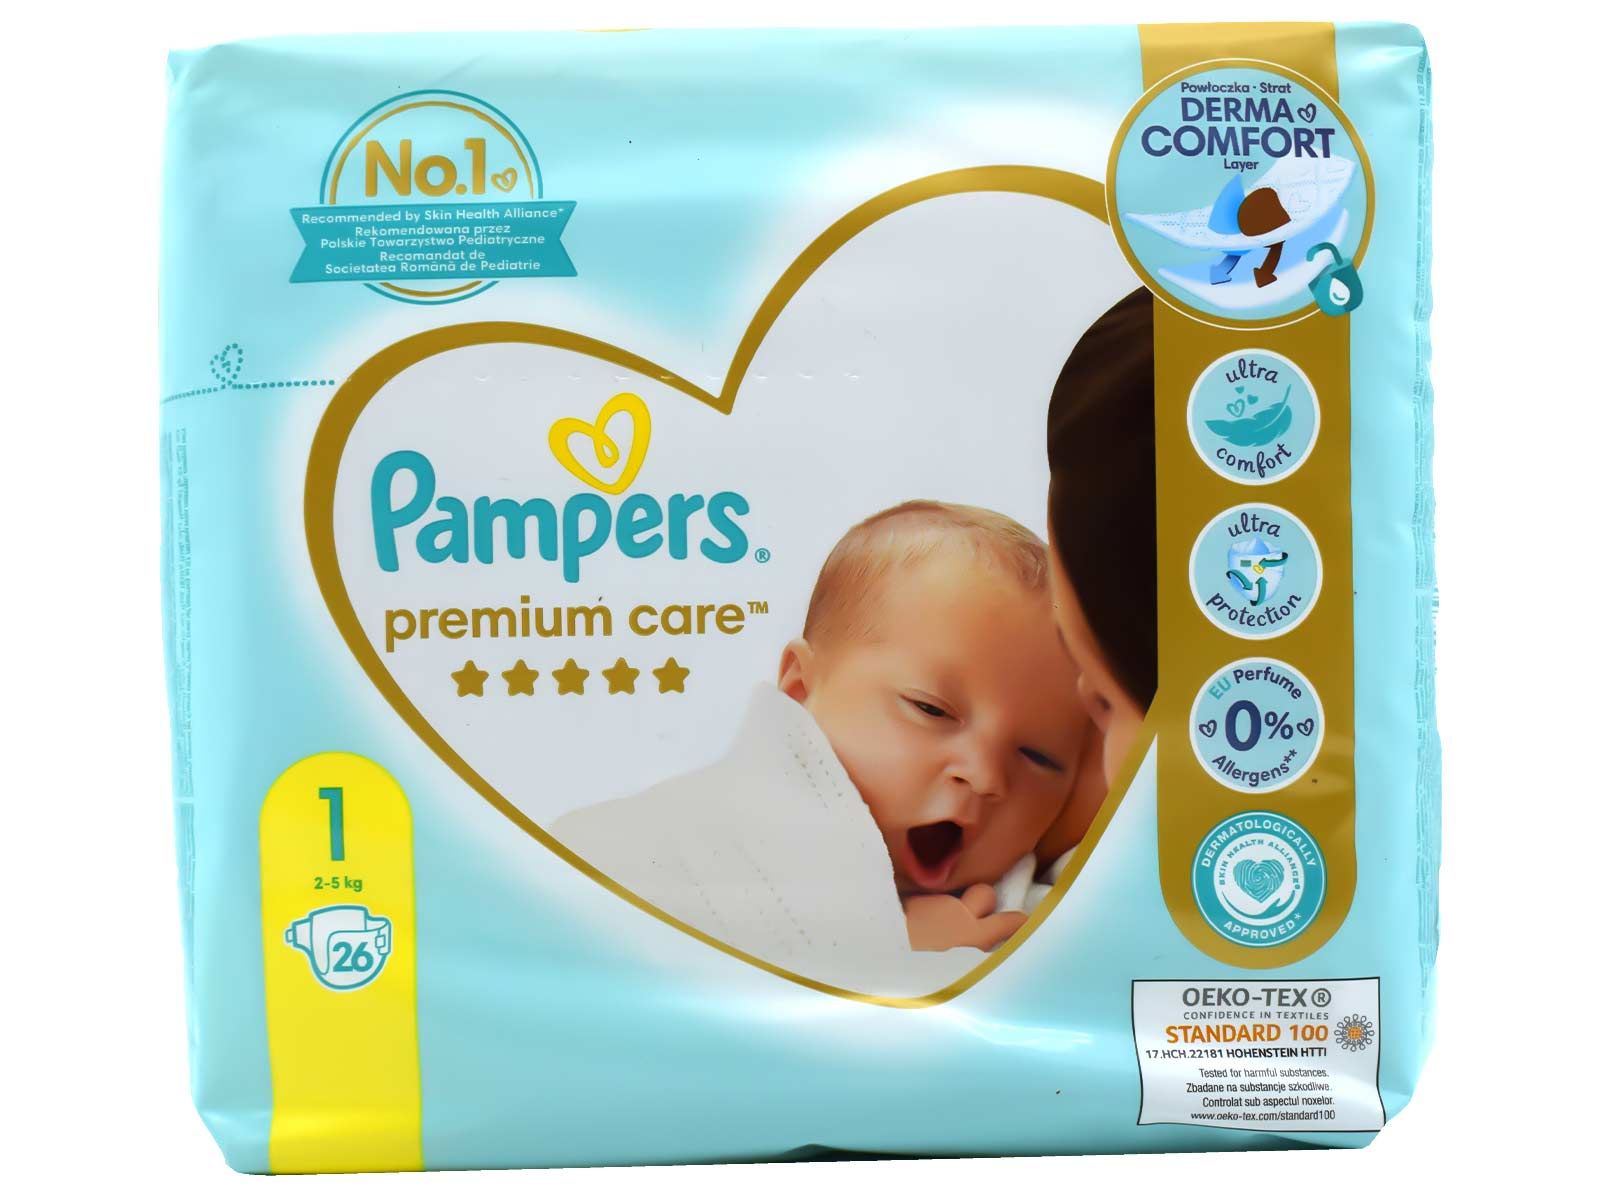 pampers na start